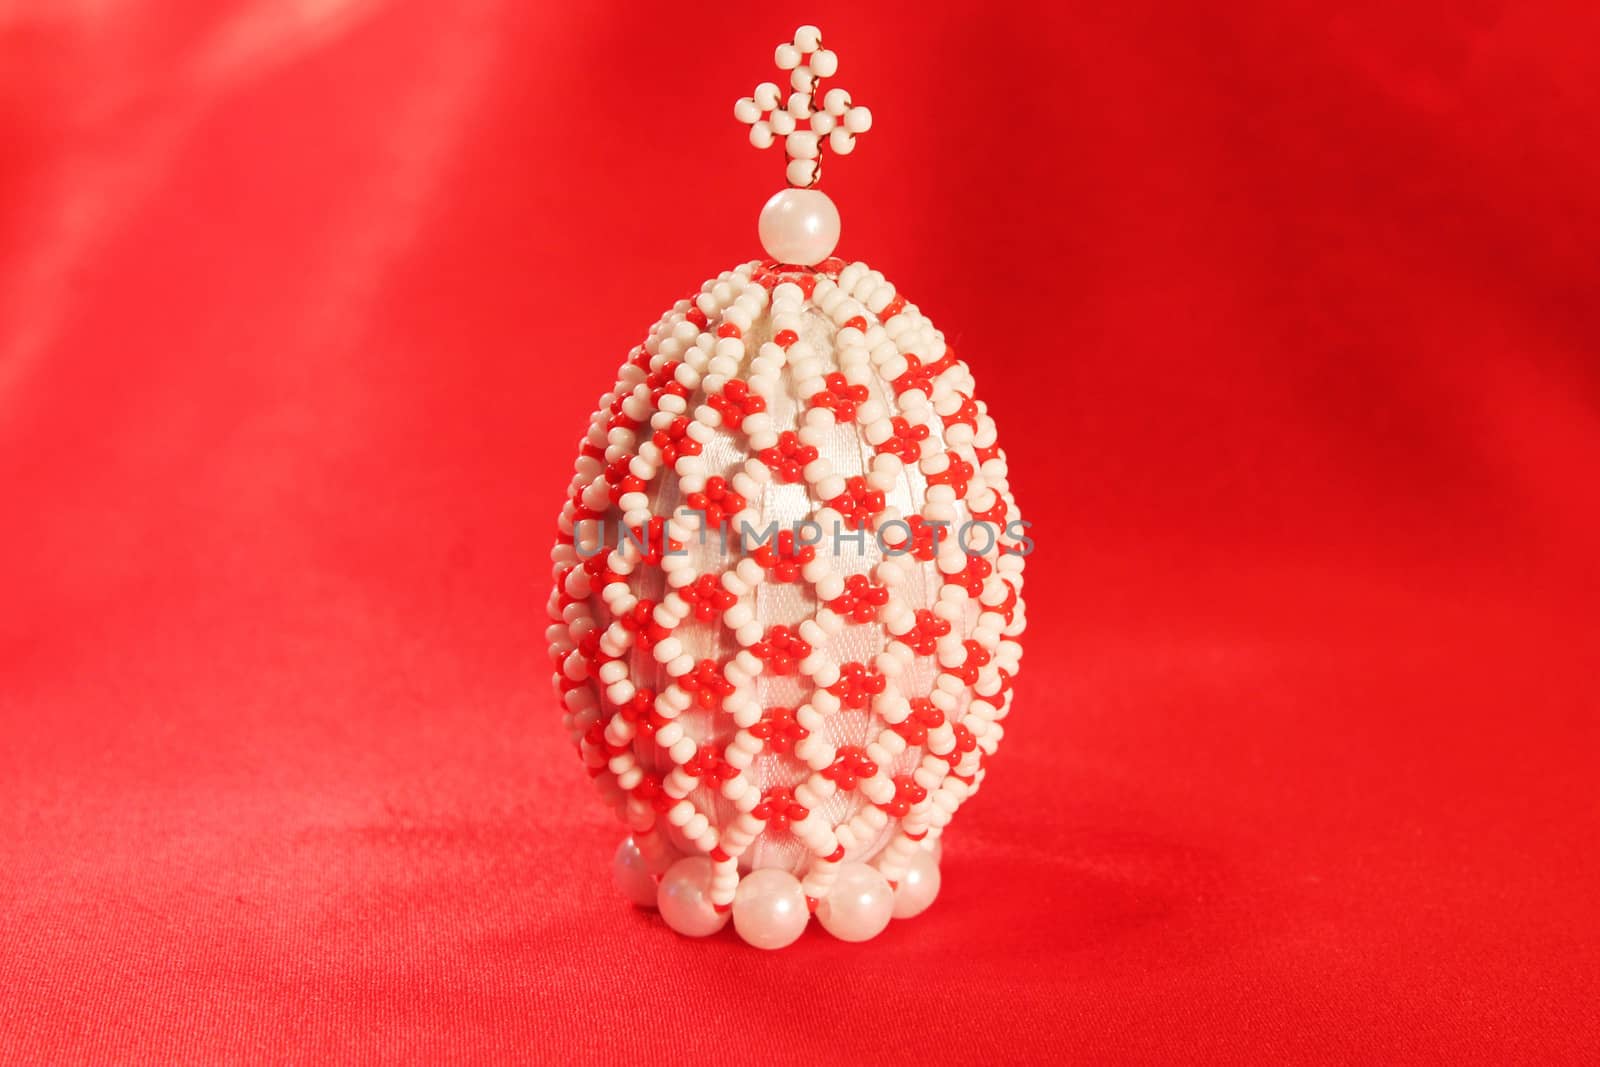 Decorative handmade  beaded  Easter egg placed on red silk